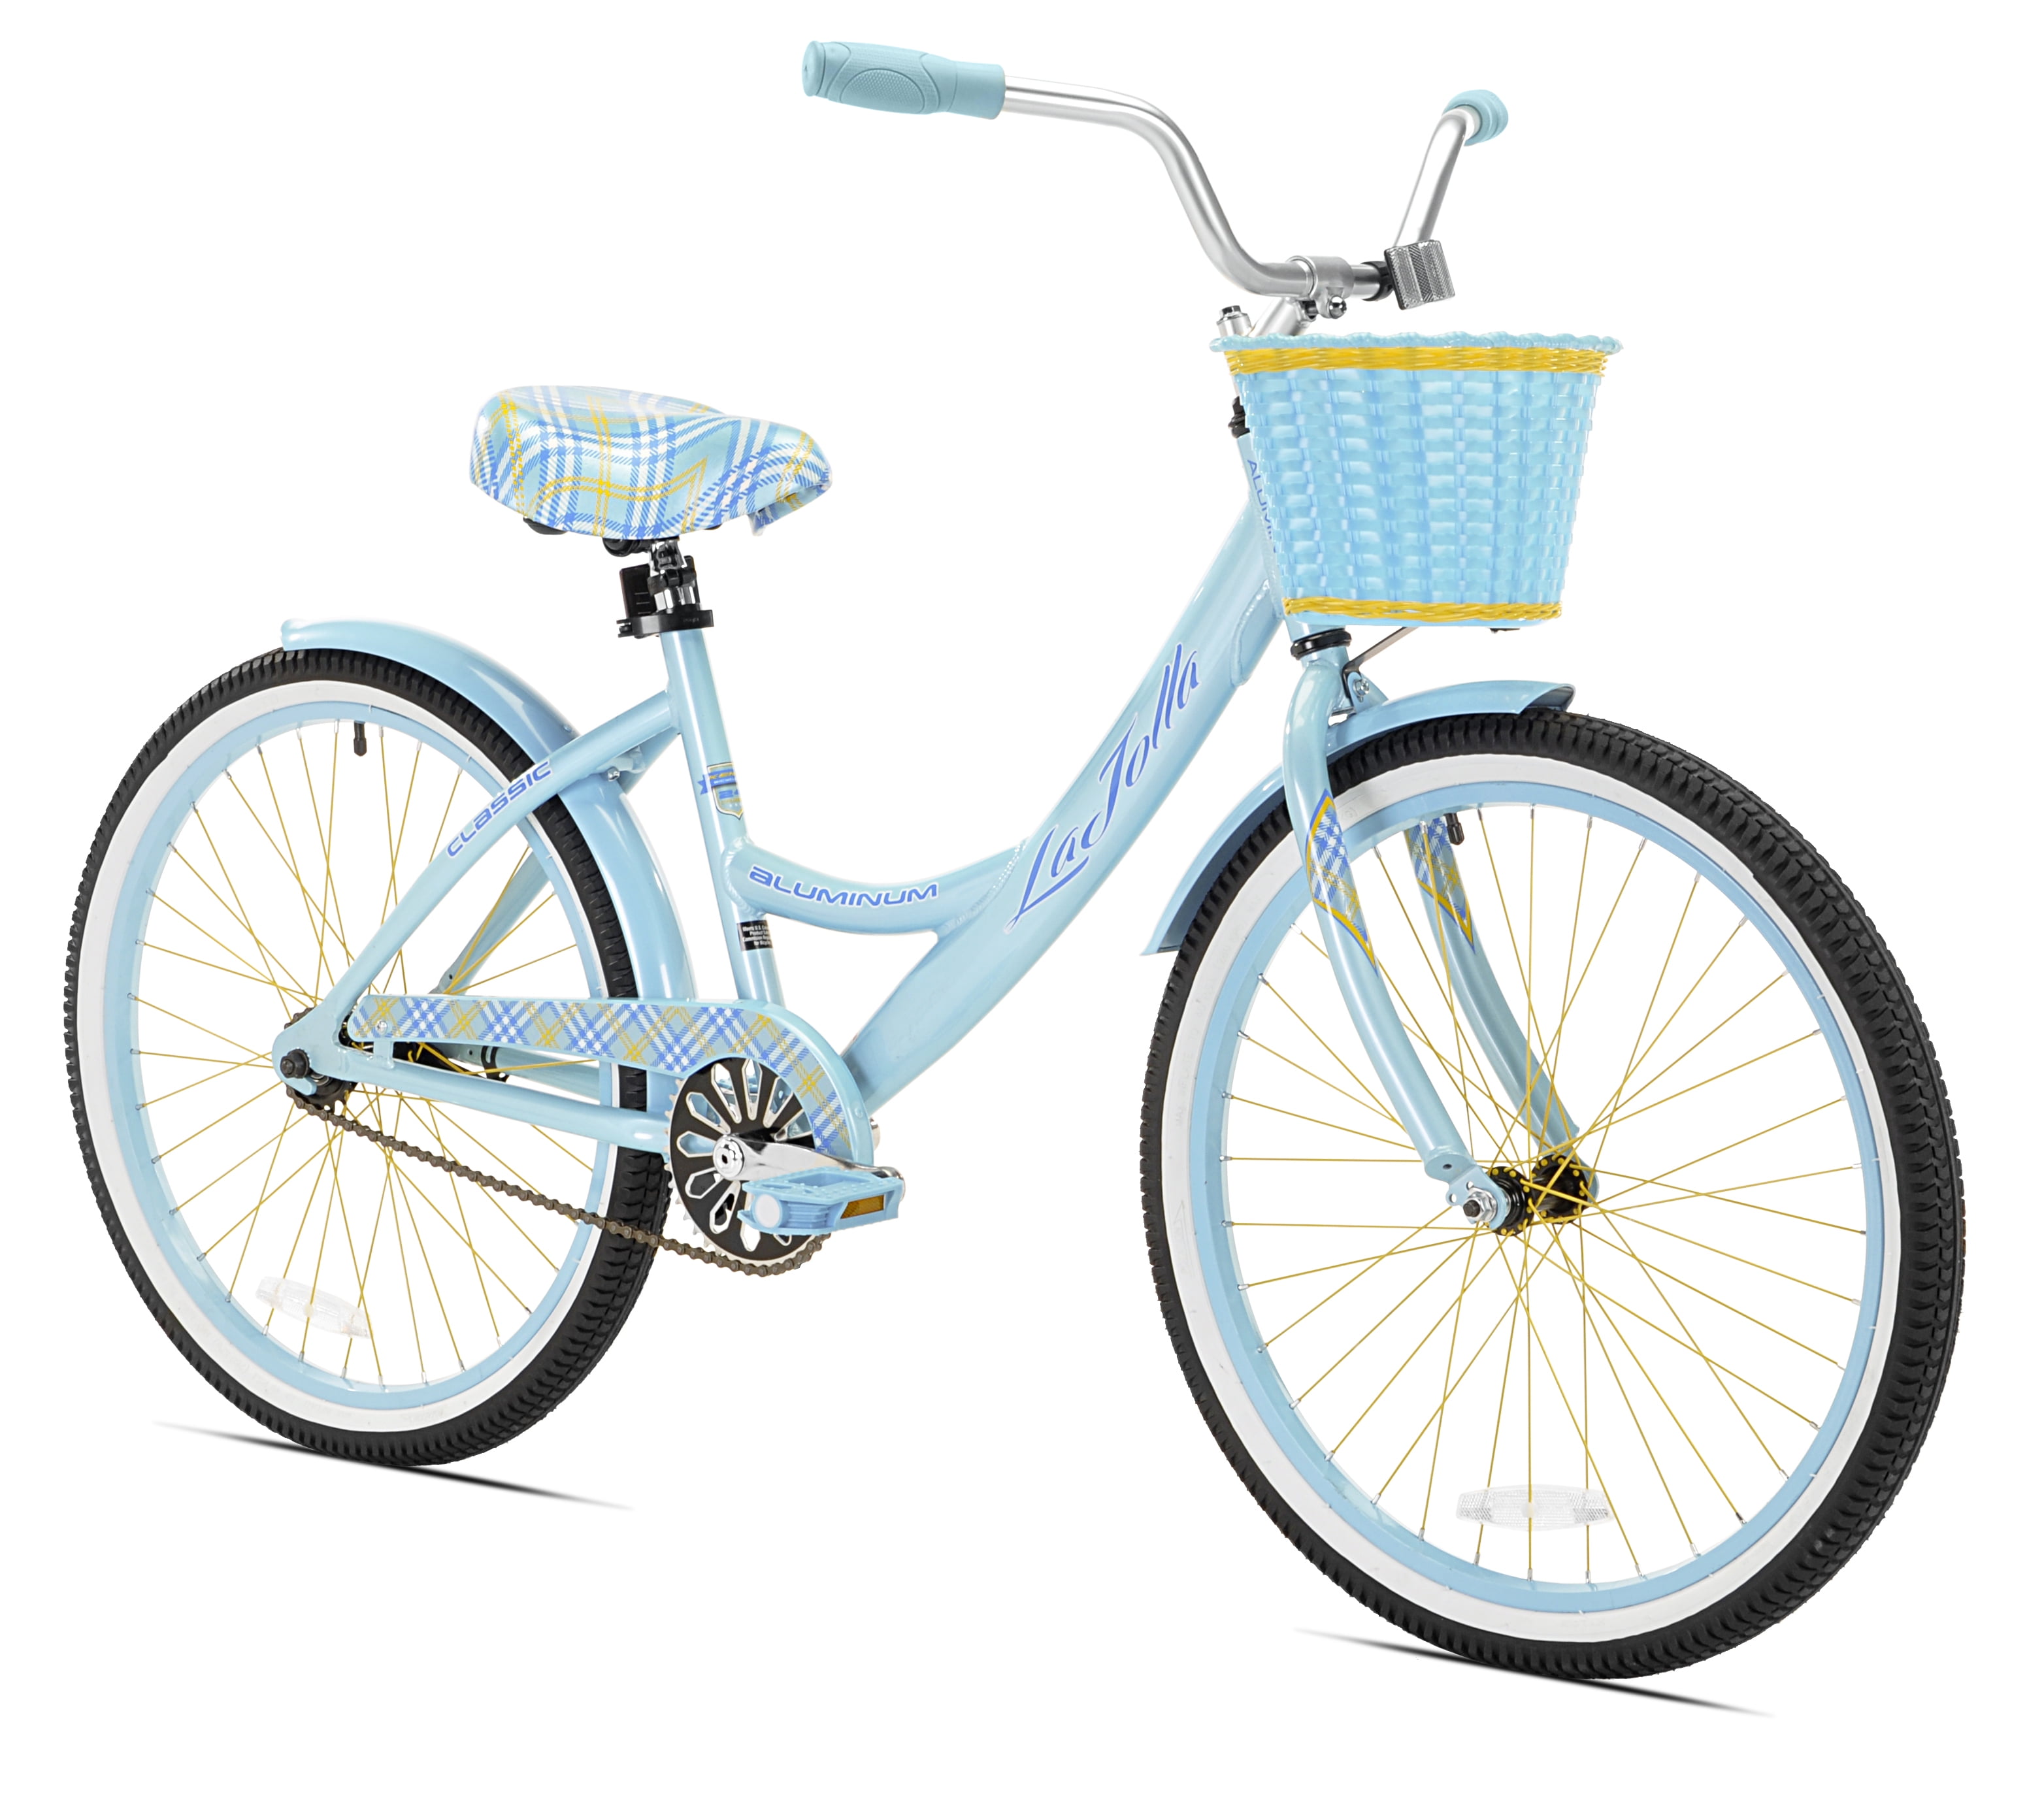 Mint Green Bicycle 54578 SHIPS FAST NEW Huffy 24" Nel Lusso Girls' Cruiser Bike 